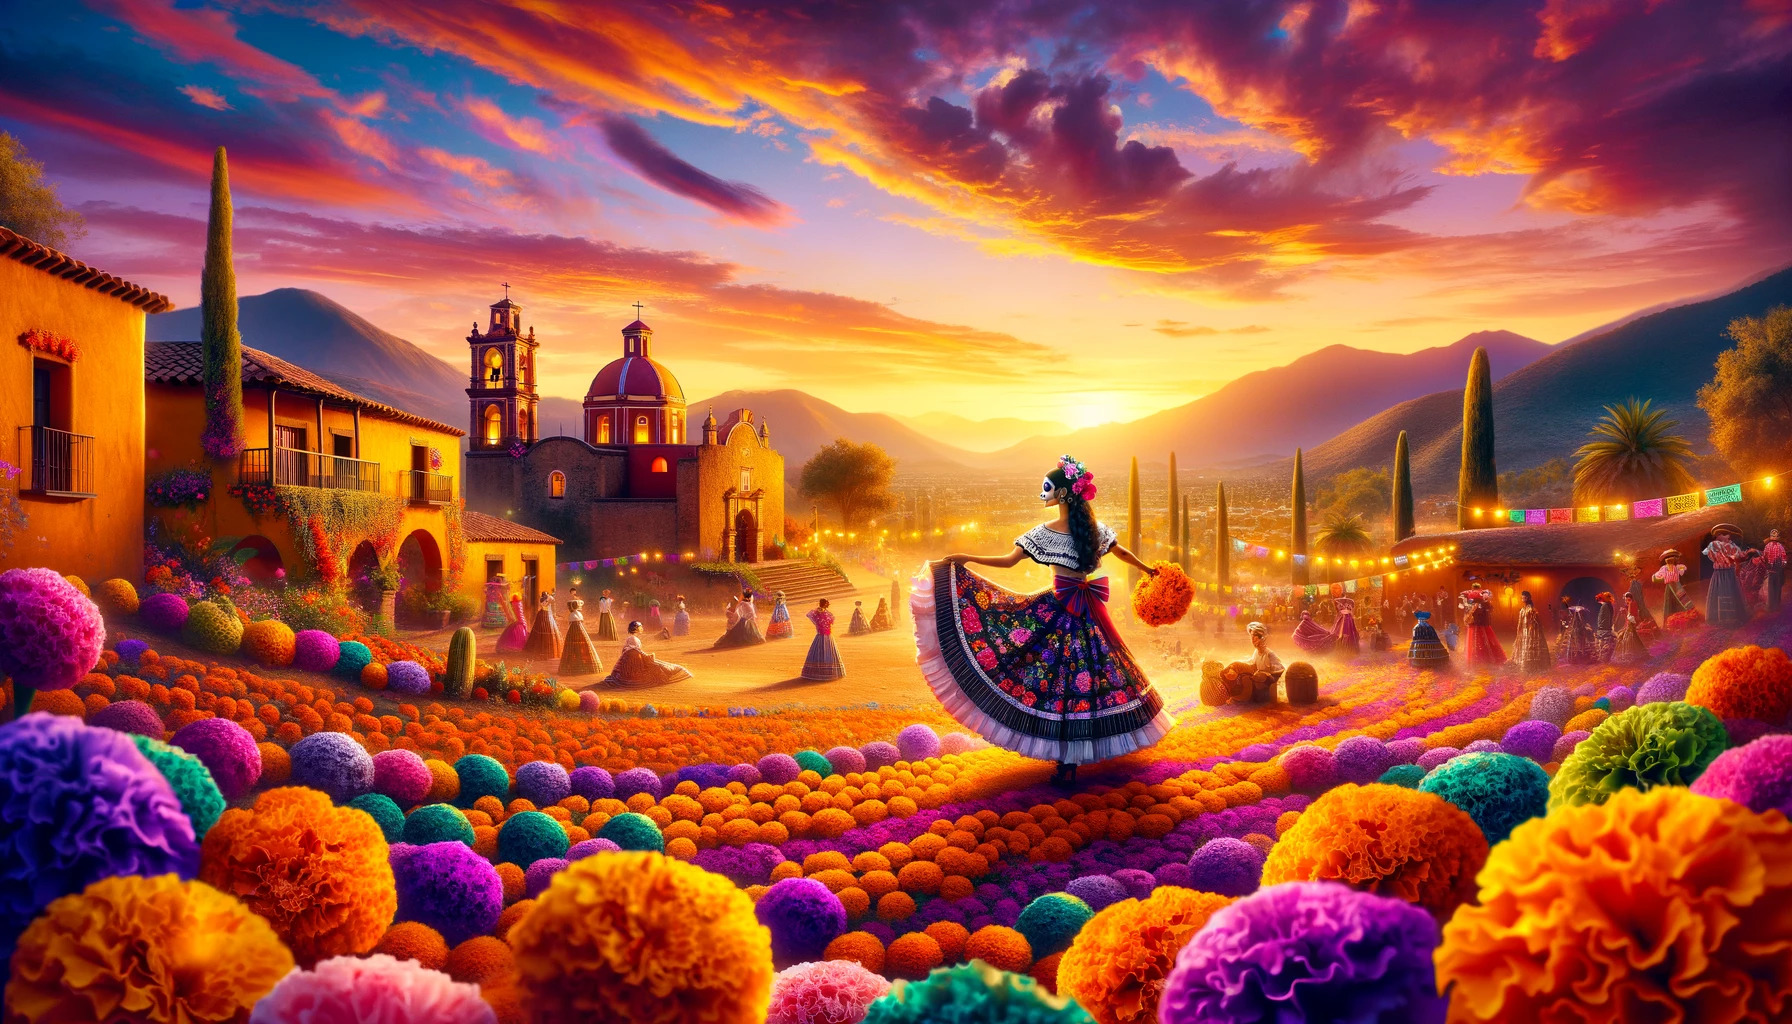 the cinematic image inspired by Mexican girl names, capturing a vibrant and picturesque Mexican landscape at sunset. The scene features a young girl in traditional dress, surrounded by marigold flowers, with an idyllic village and a colorful sky in the background.